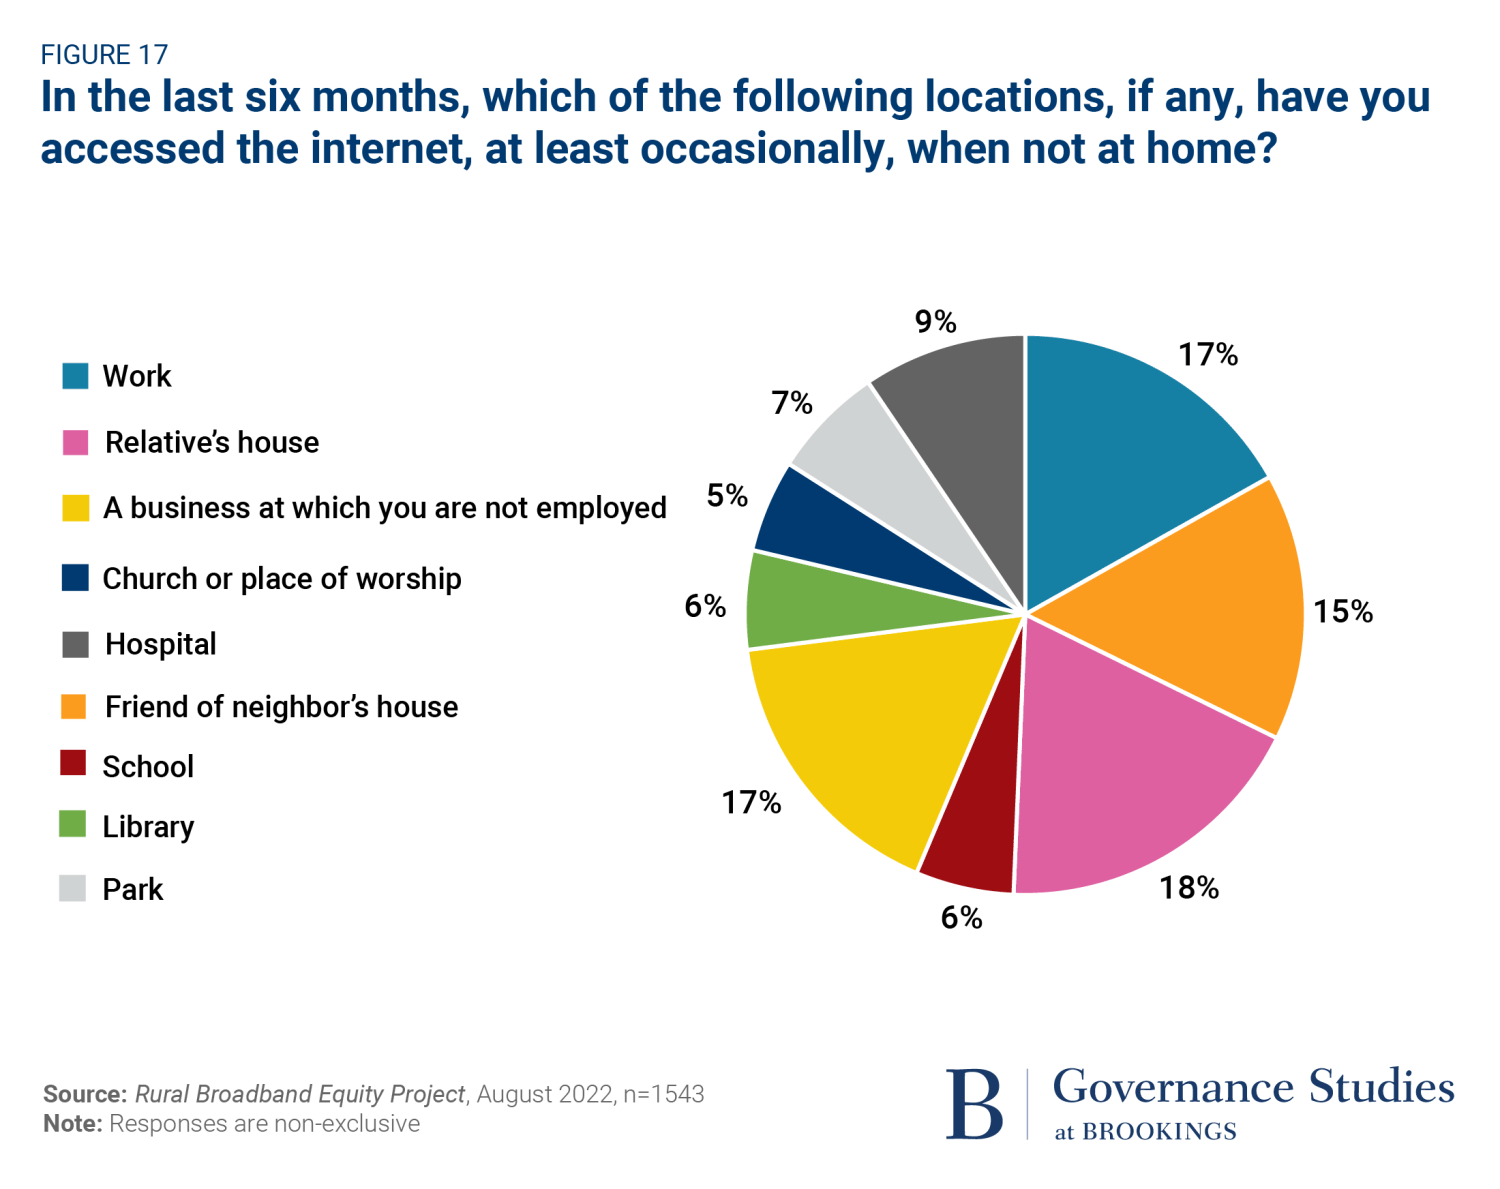 In the last six months, which of the following locations, if any, have you accessed the internet, at least occasionally, when not at home?